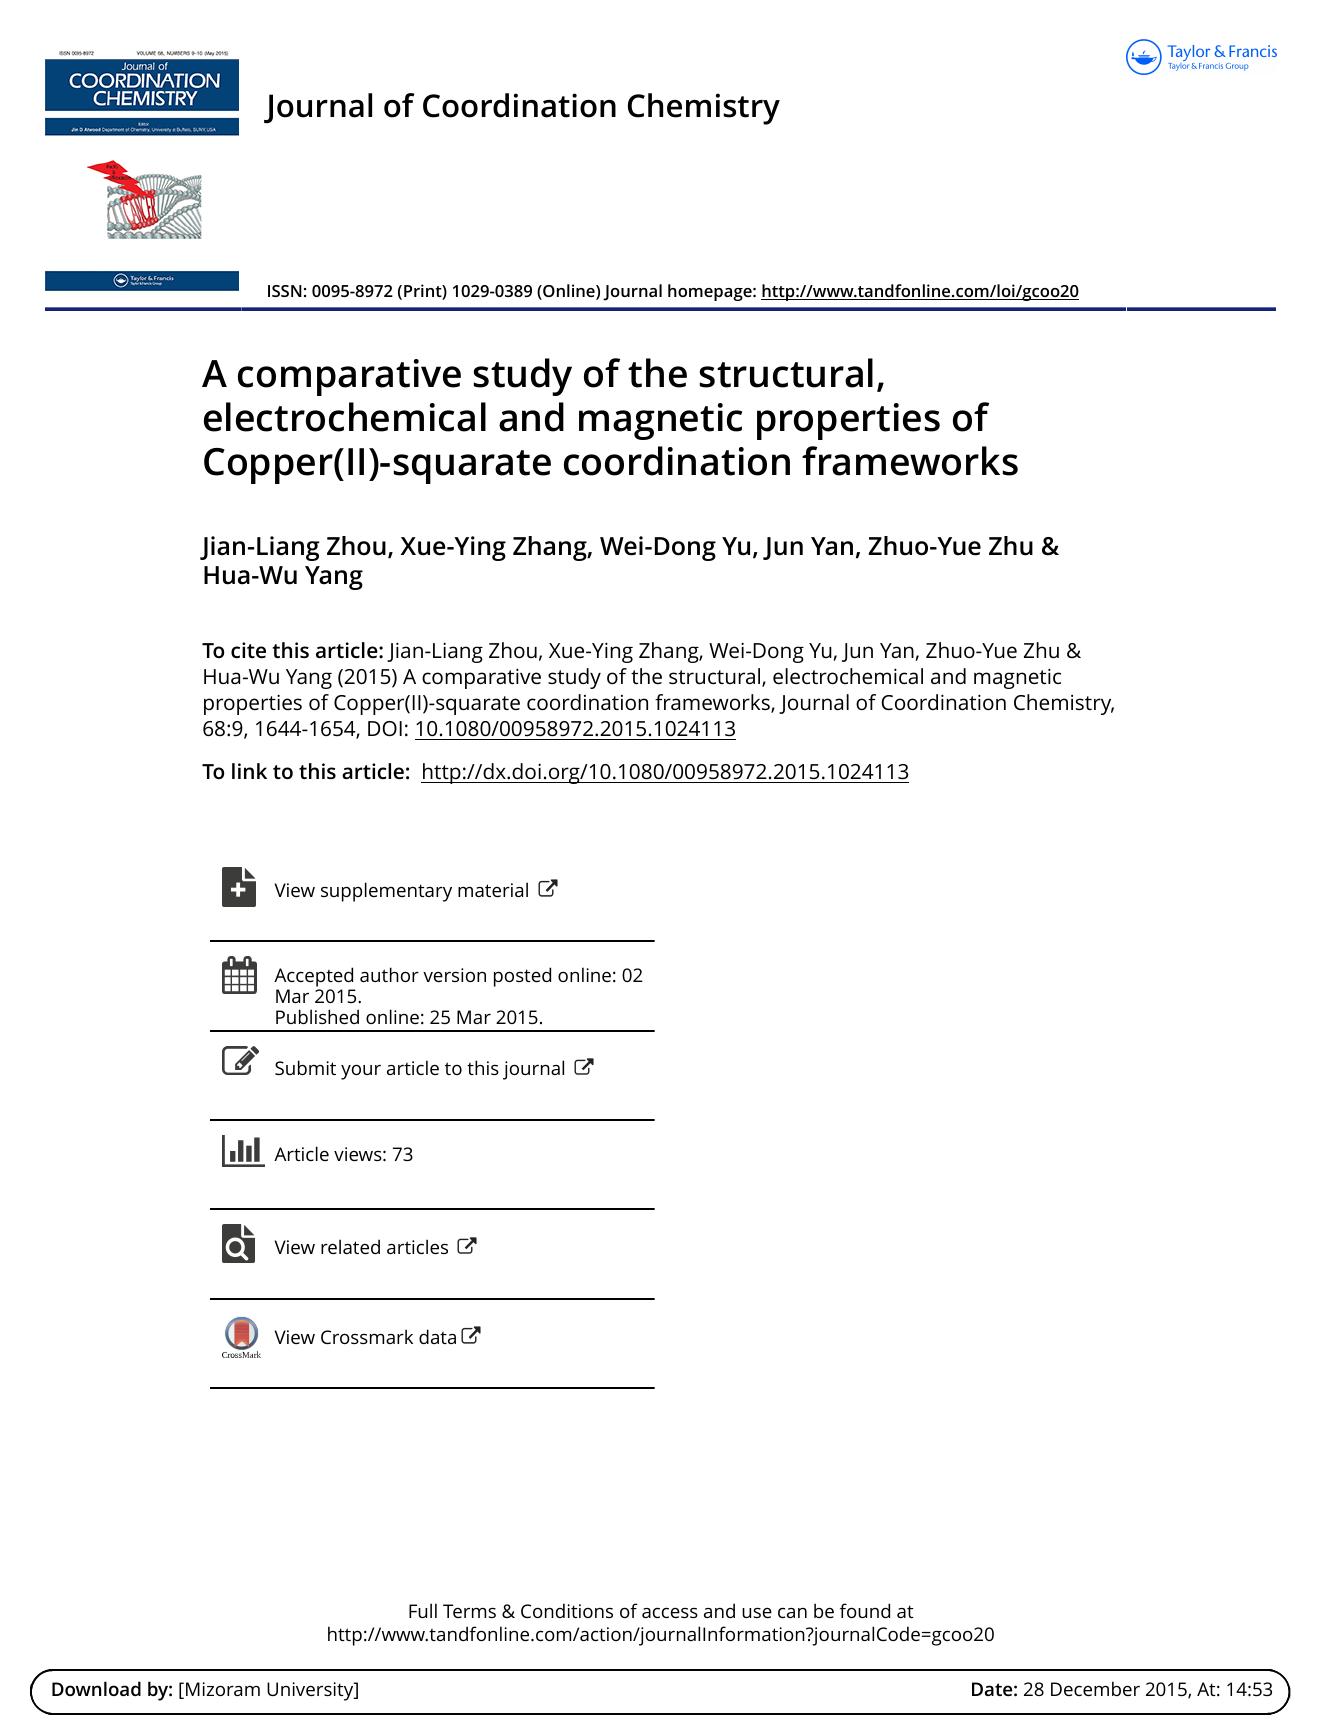 A comparative study of the structural, electrochemical and magnetic properties of Copper(II)-squarate coordination frameworks by Jian-Liang Zhou